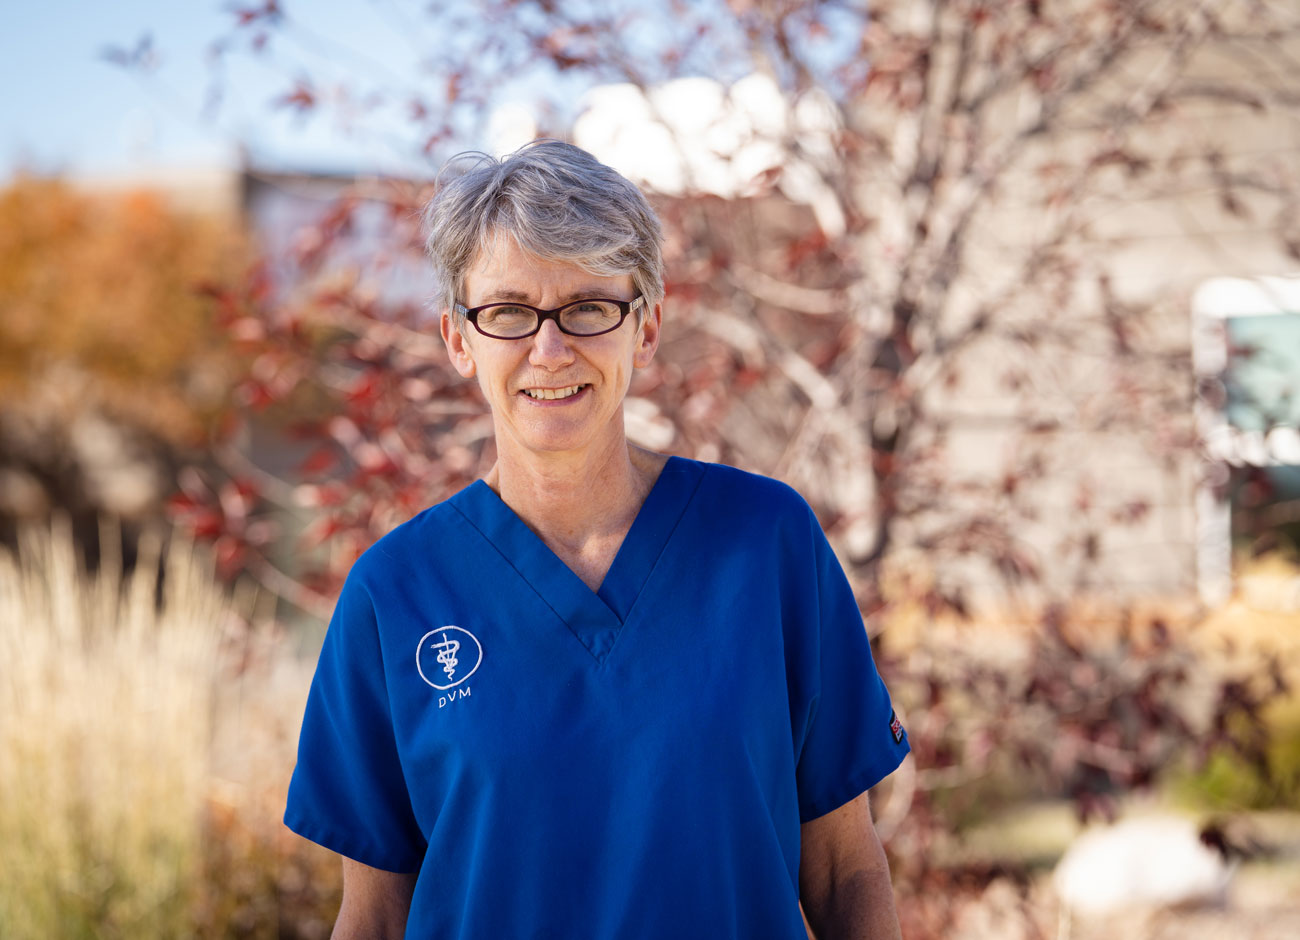 a woman with gray hair and black glasses smiles at the camera. She is wearing a royal blue veterinary technician outfit.